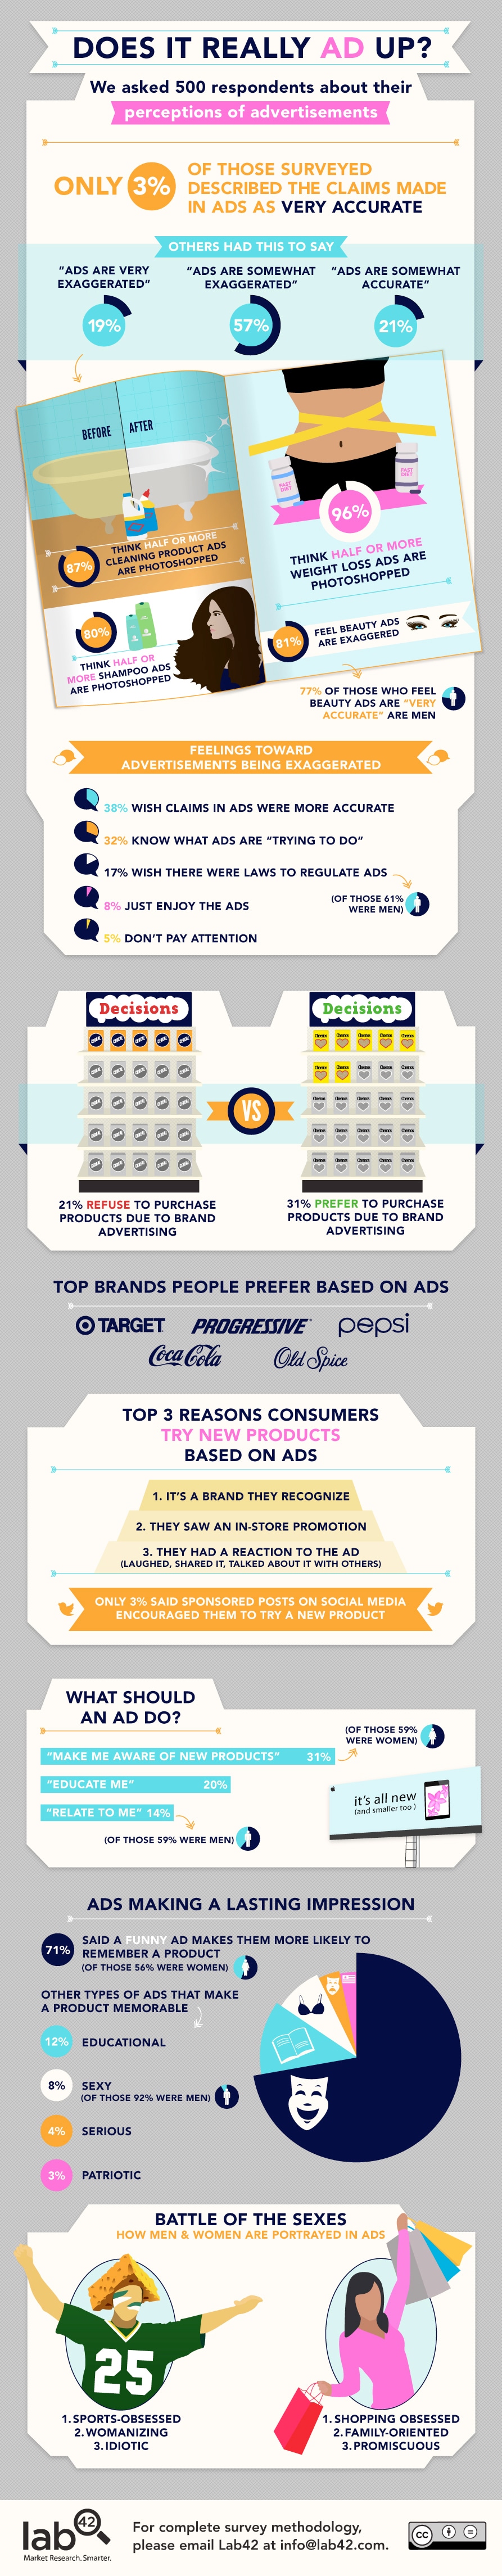 Advertising Perception: We Know When Ads Are Inaccurate [Infographic]